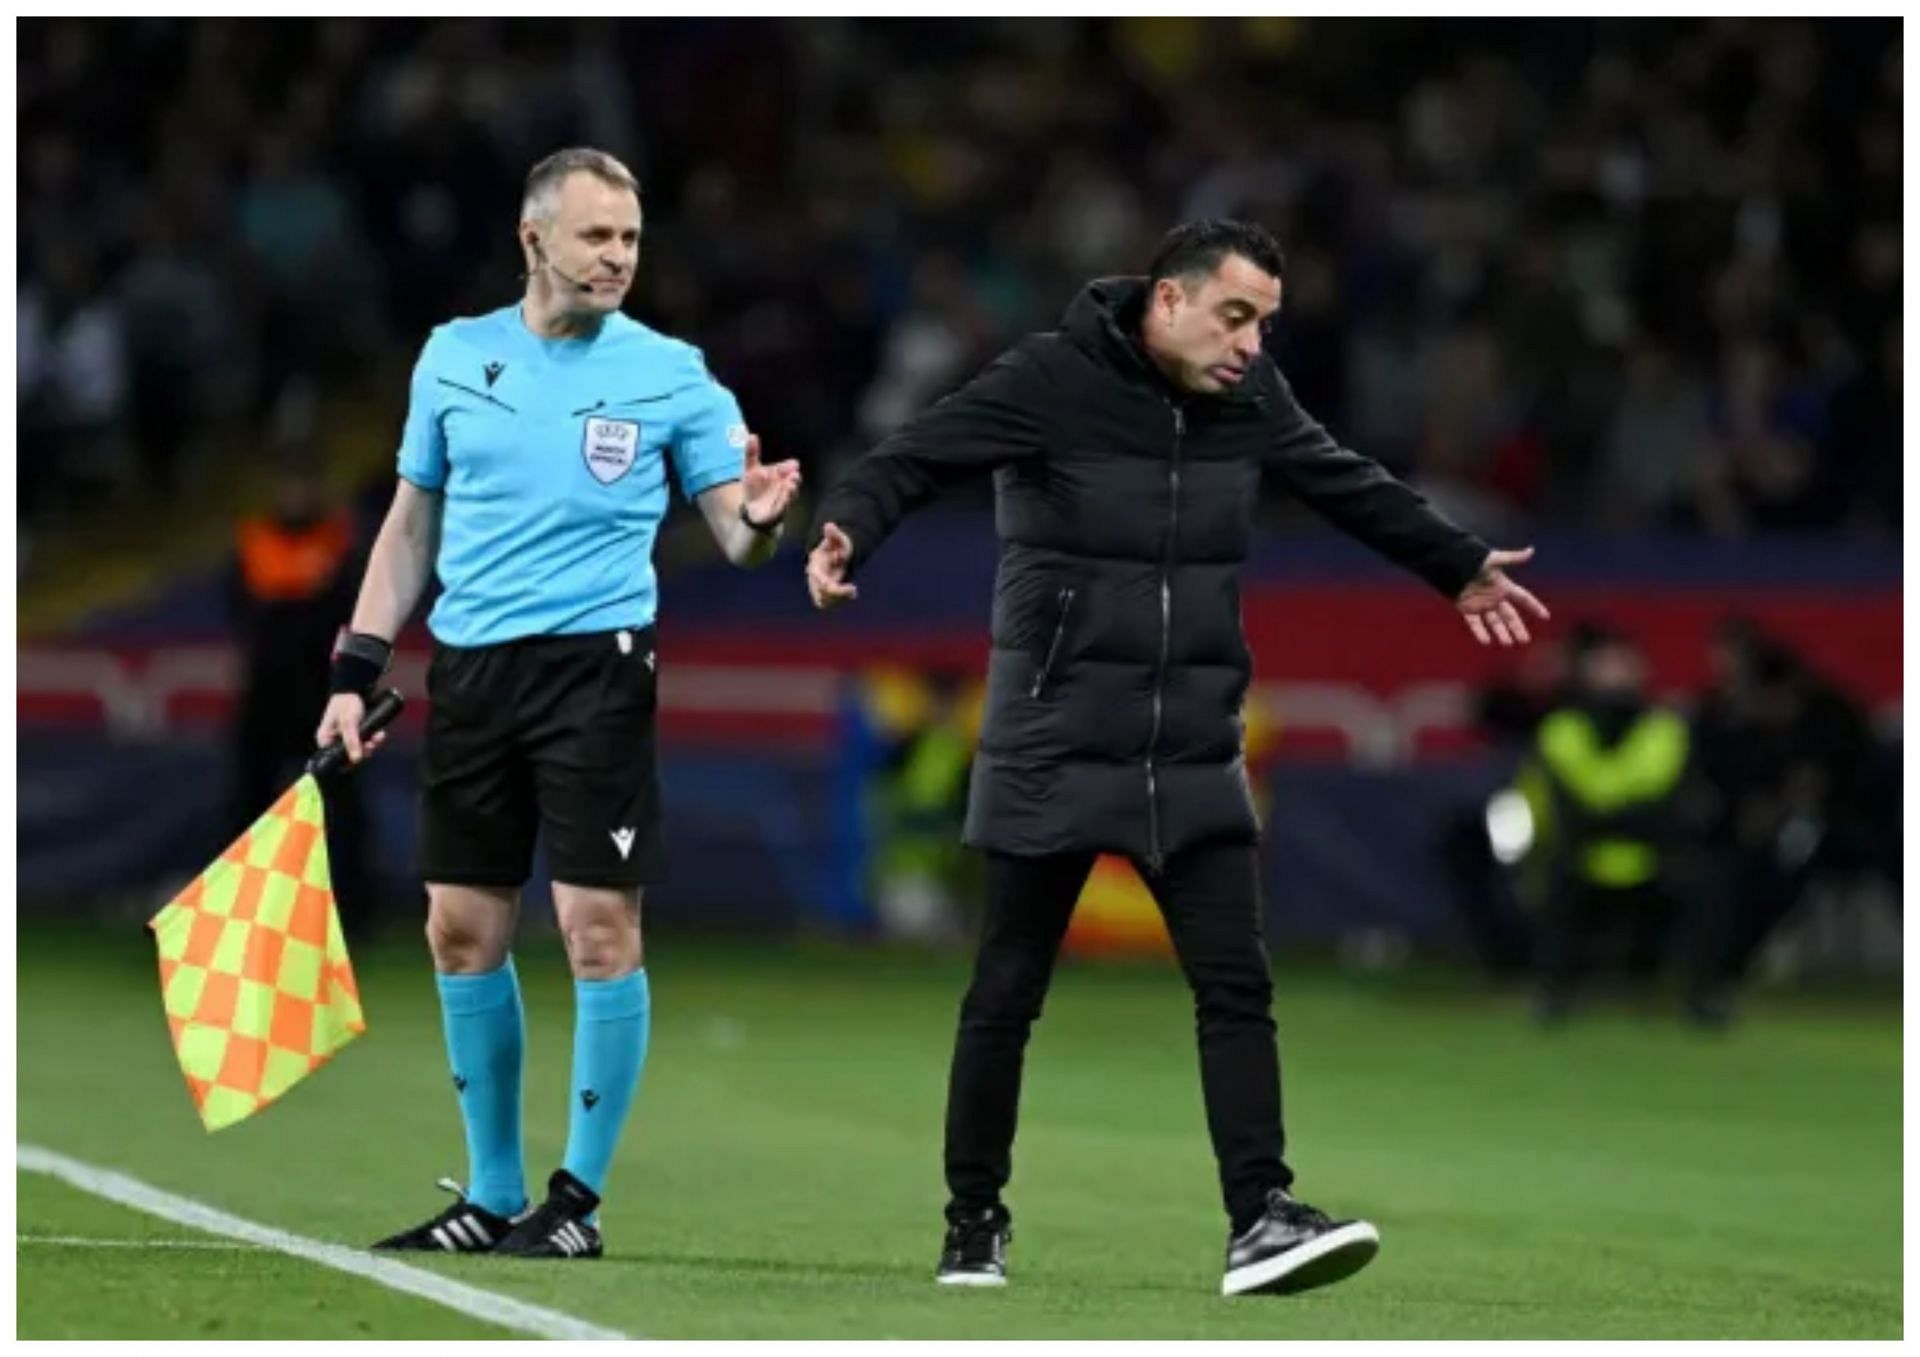 Barcelona coach Xavi during the match against PSG (Photo by David Ramos/Getty Images)